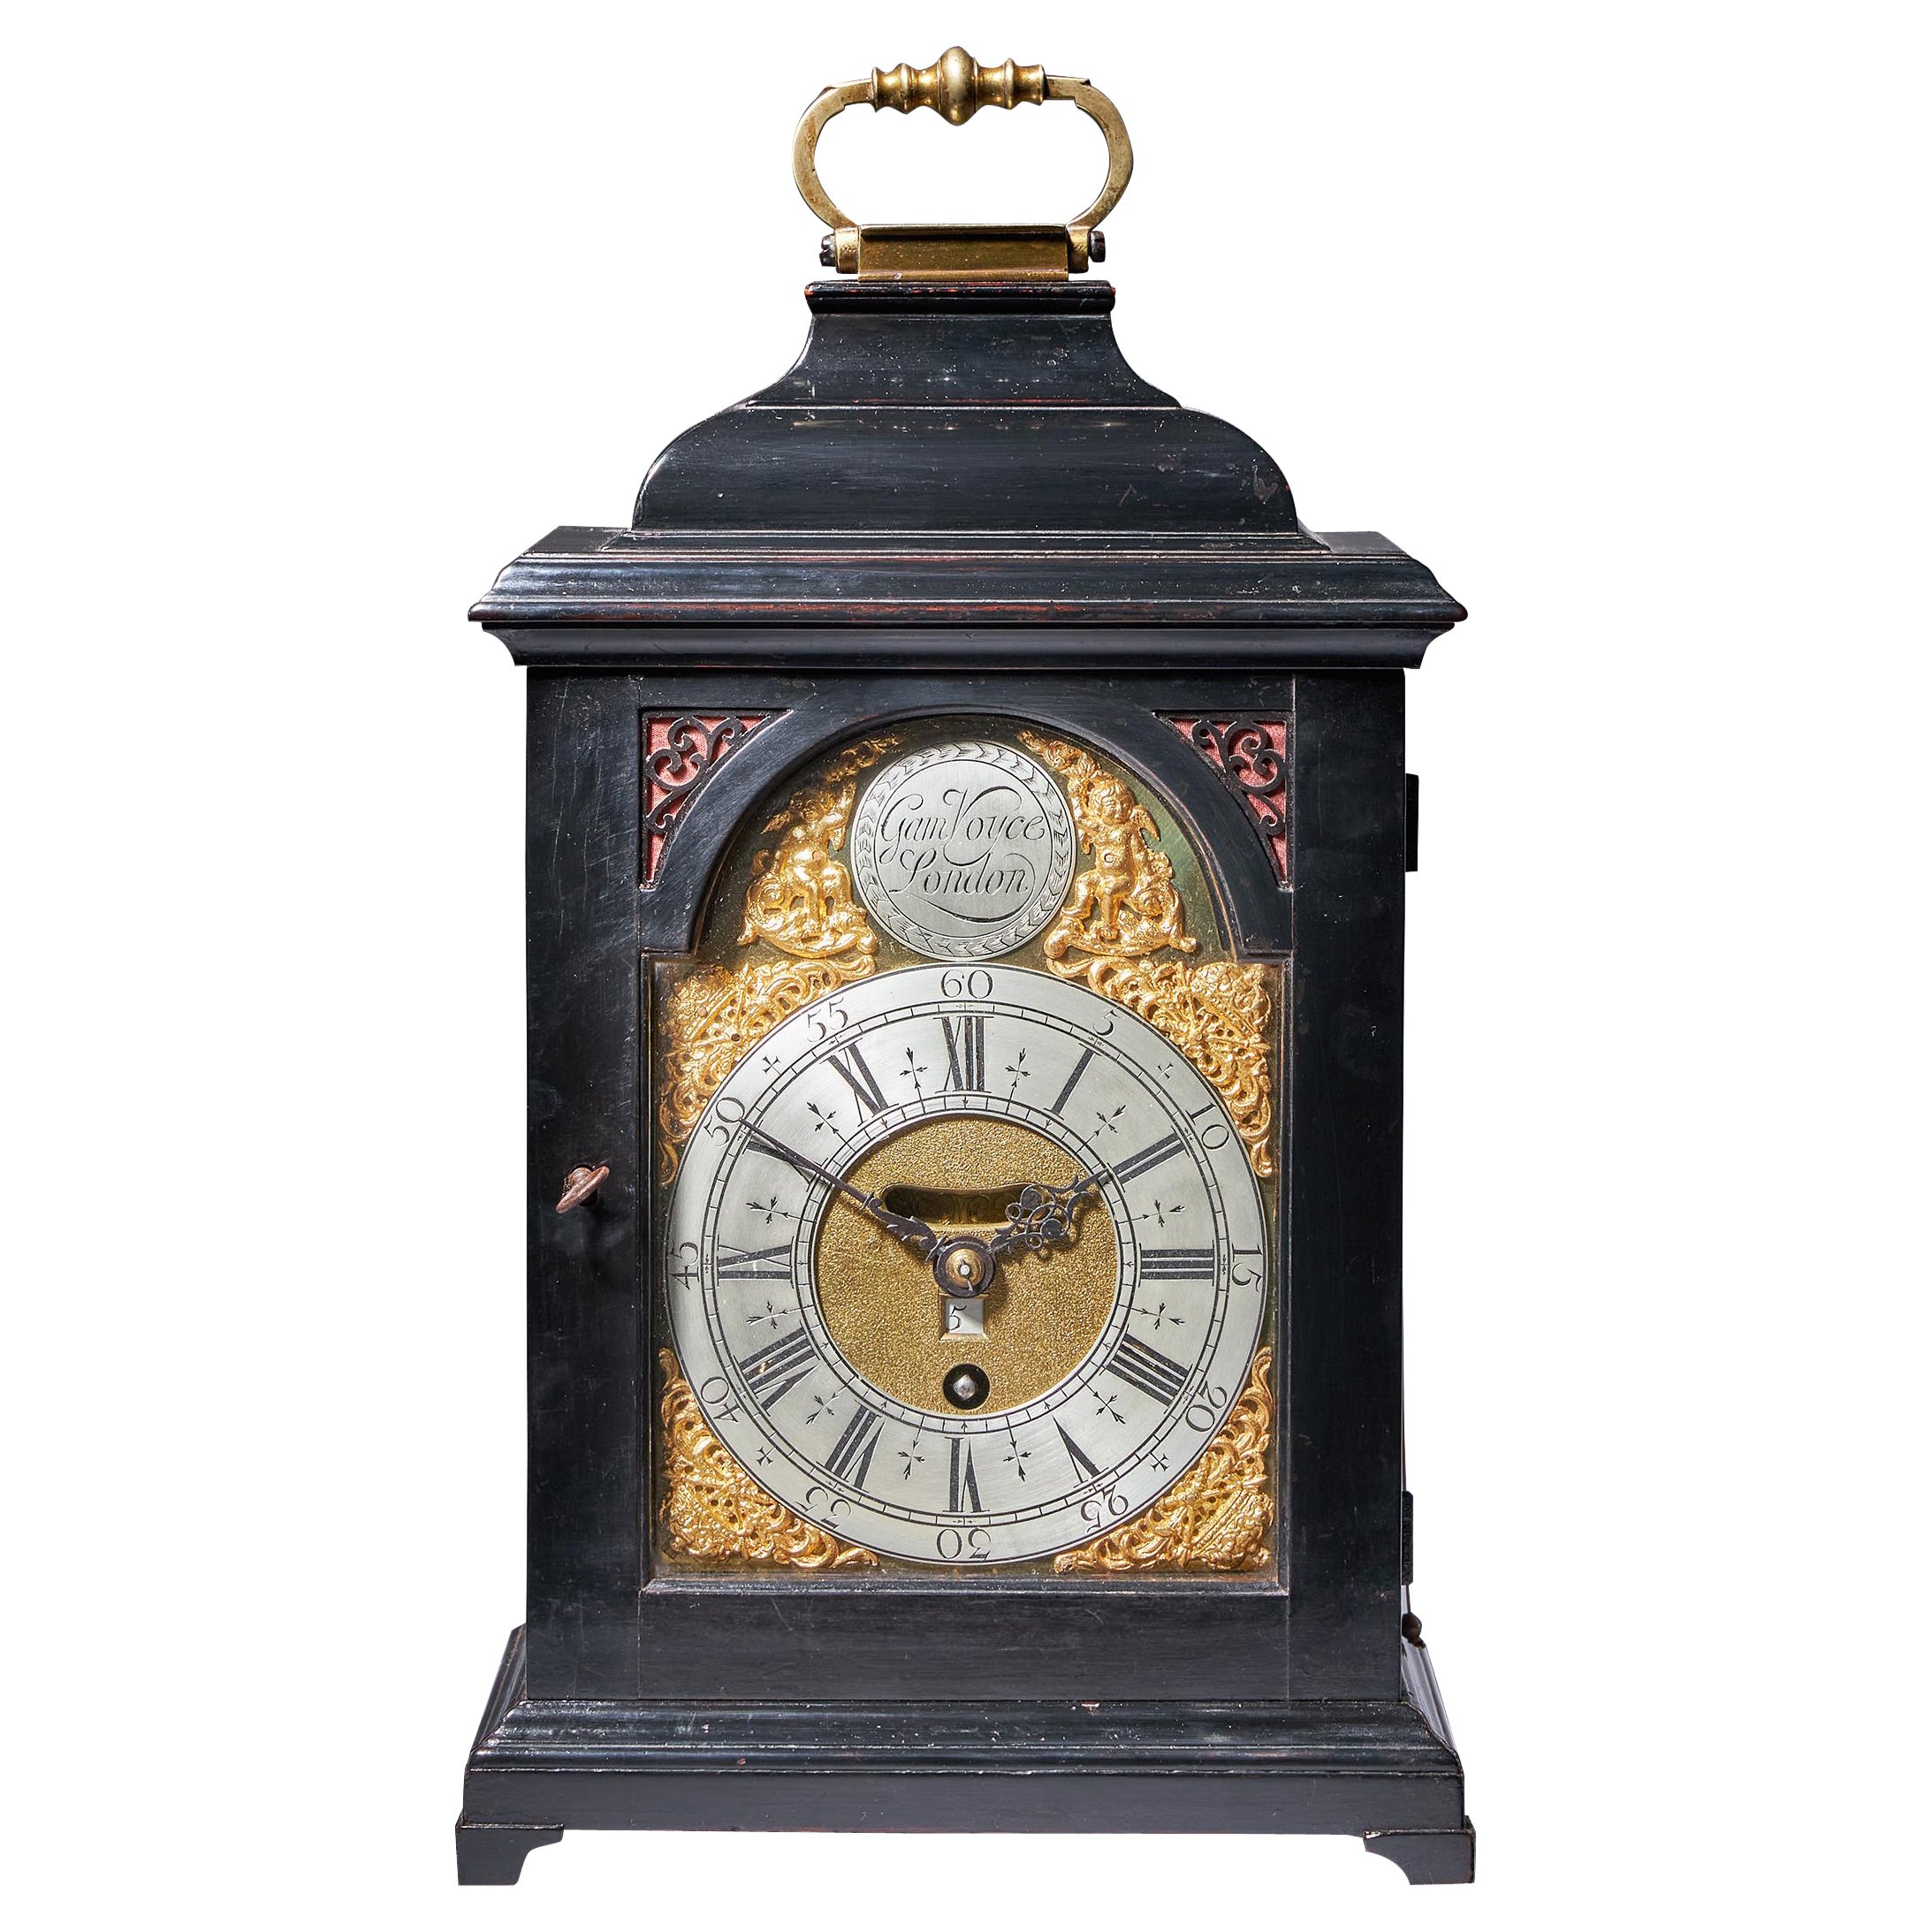 An extremely attractive early 18th century George I period table clock of small proportions by Gamaliel Voyce, c.1725.

The proportions of the petite clock (measuring only 14 inches (36cm) with the handle up) are such that is difficult not to fall